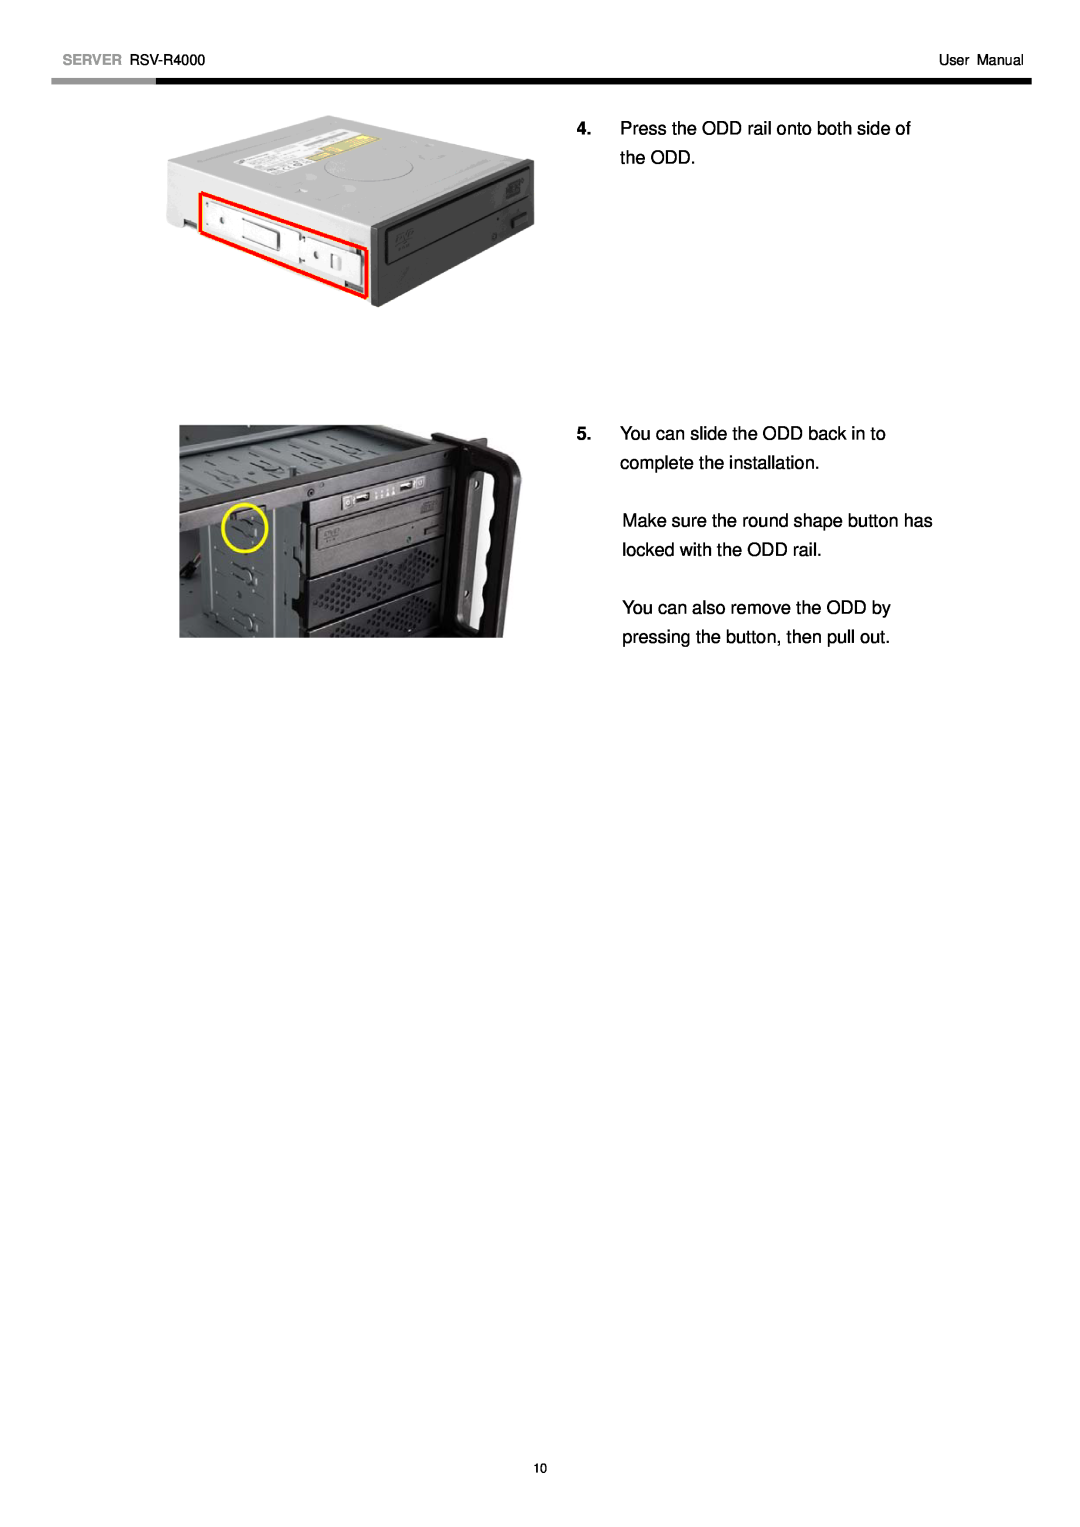 Rosewill user manual Press the ODD rail onto both side of the ODD, SERVER RSV-R4000, User Manual 